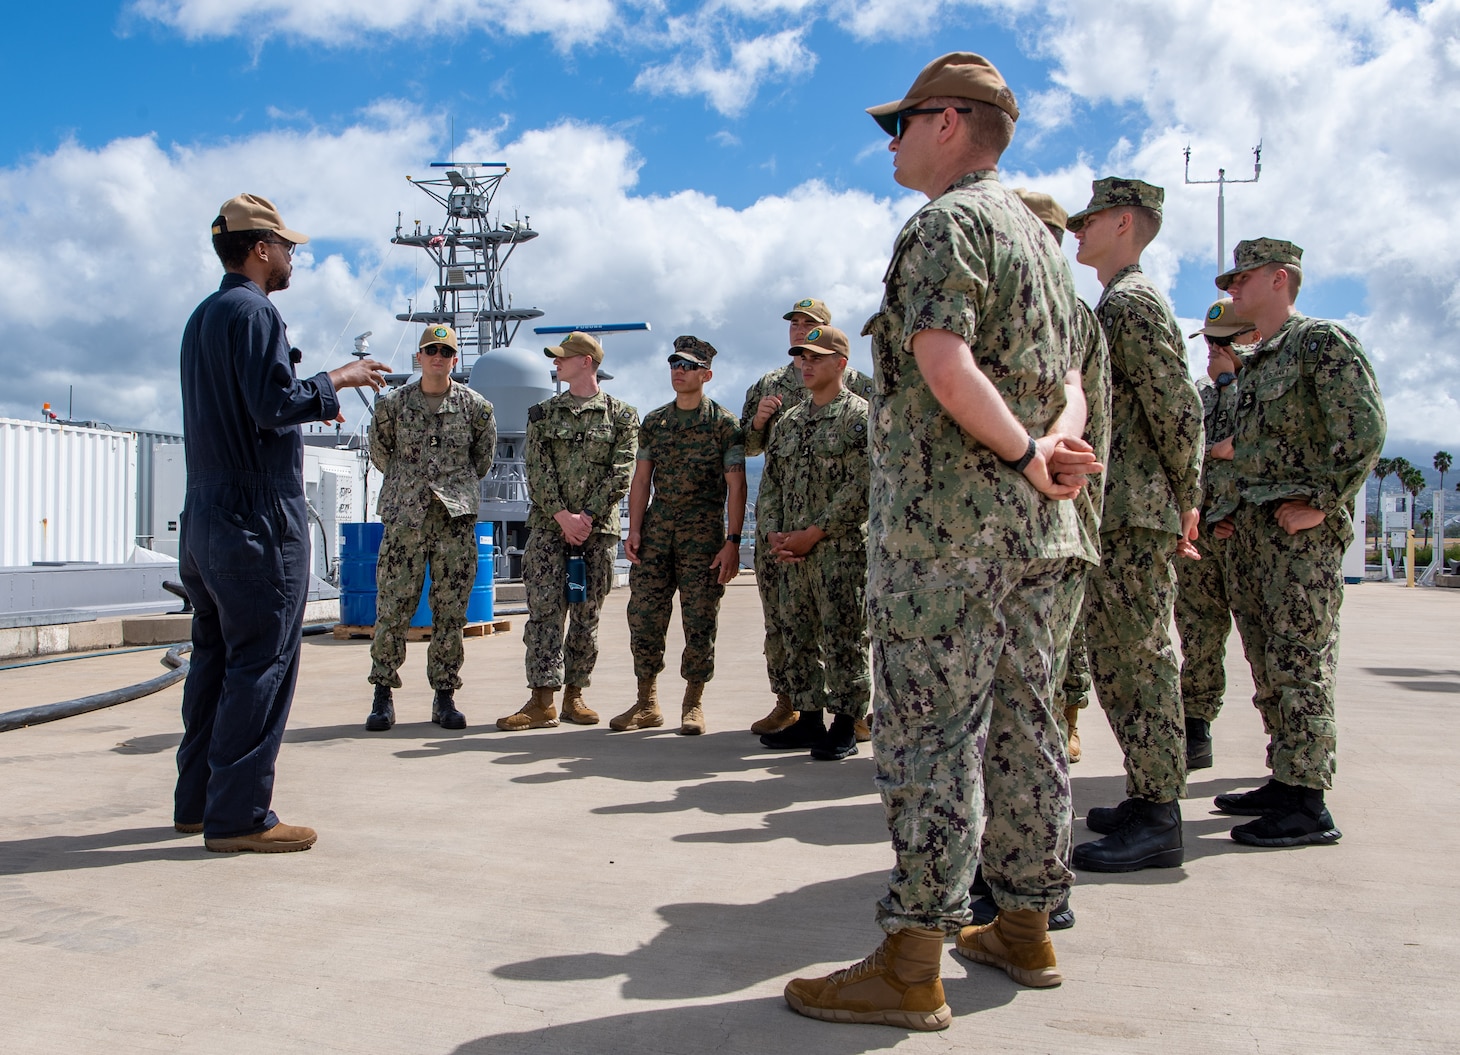 Lt. Christopher Shaw (Left), from Plaquemine, Louisiana, communications officer assigned to Unmanned Surface Vessel Division One, explains to University of Hawaii Navy ROTC midshipmen the operational capabilities of the unmanned surface vessel Ranger during a tour of the ship on Joint Base Pearl Harbor-Hickam, Hawaii, Aug. 16, 2023. The midshipmen are participating in a Navy summer internship program at U.S. Pacific Fleet.